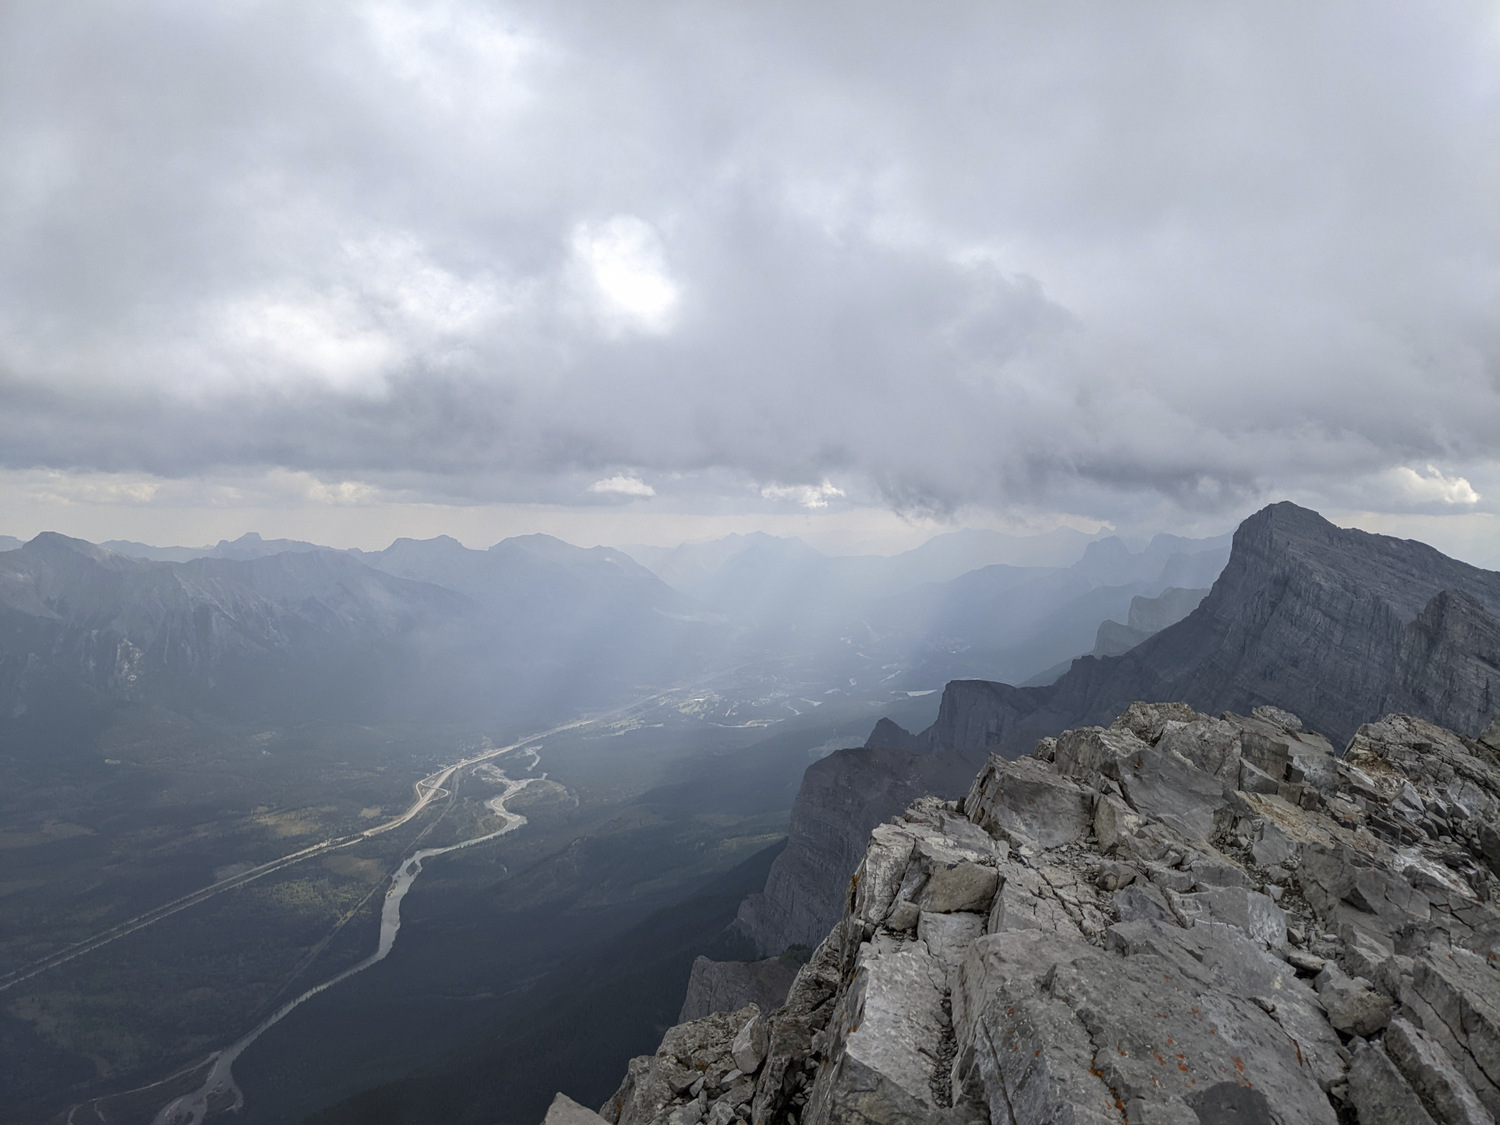 At Rundle’s peak (2,948m), click for photosphere